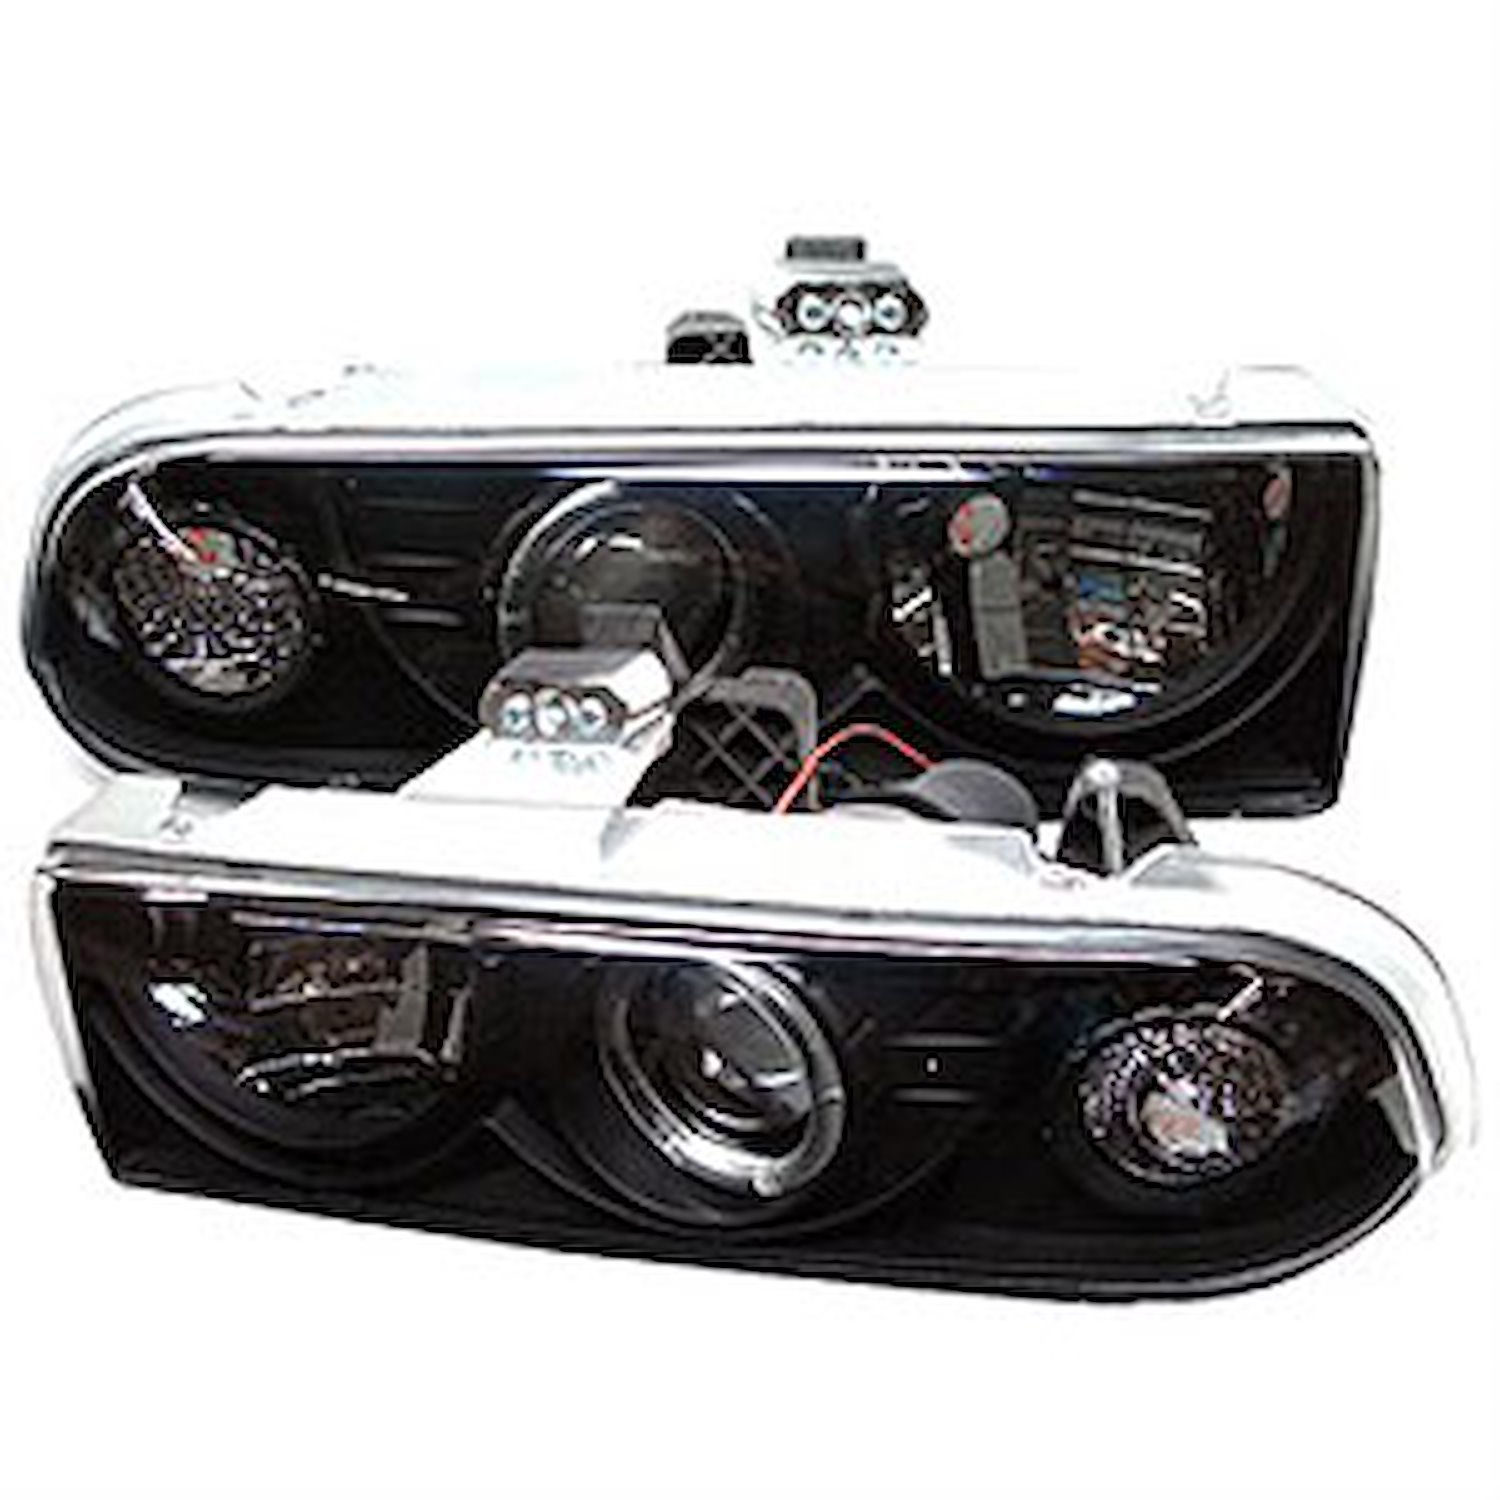 Halo LED Projector Headlights 1998-2004 Chevy S10